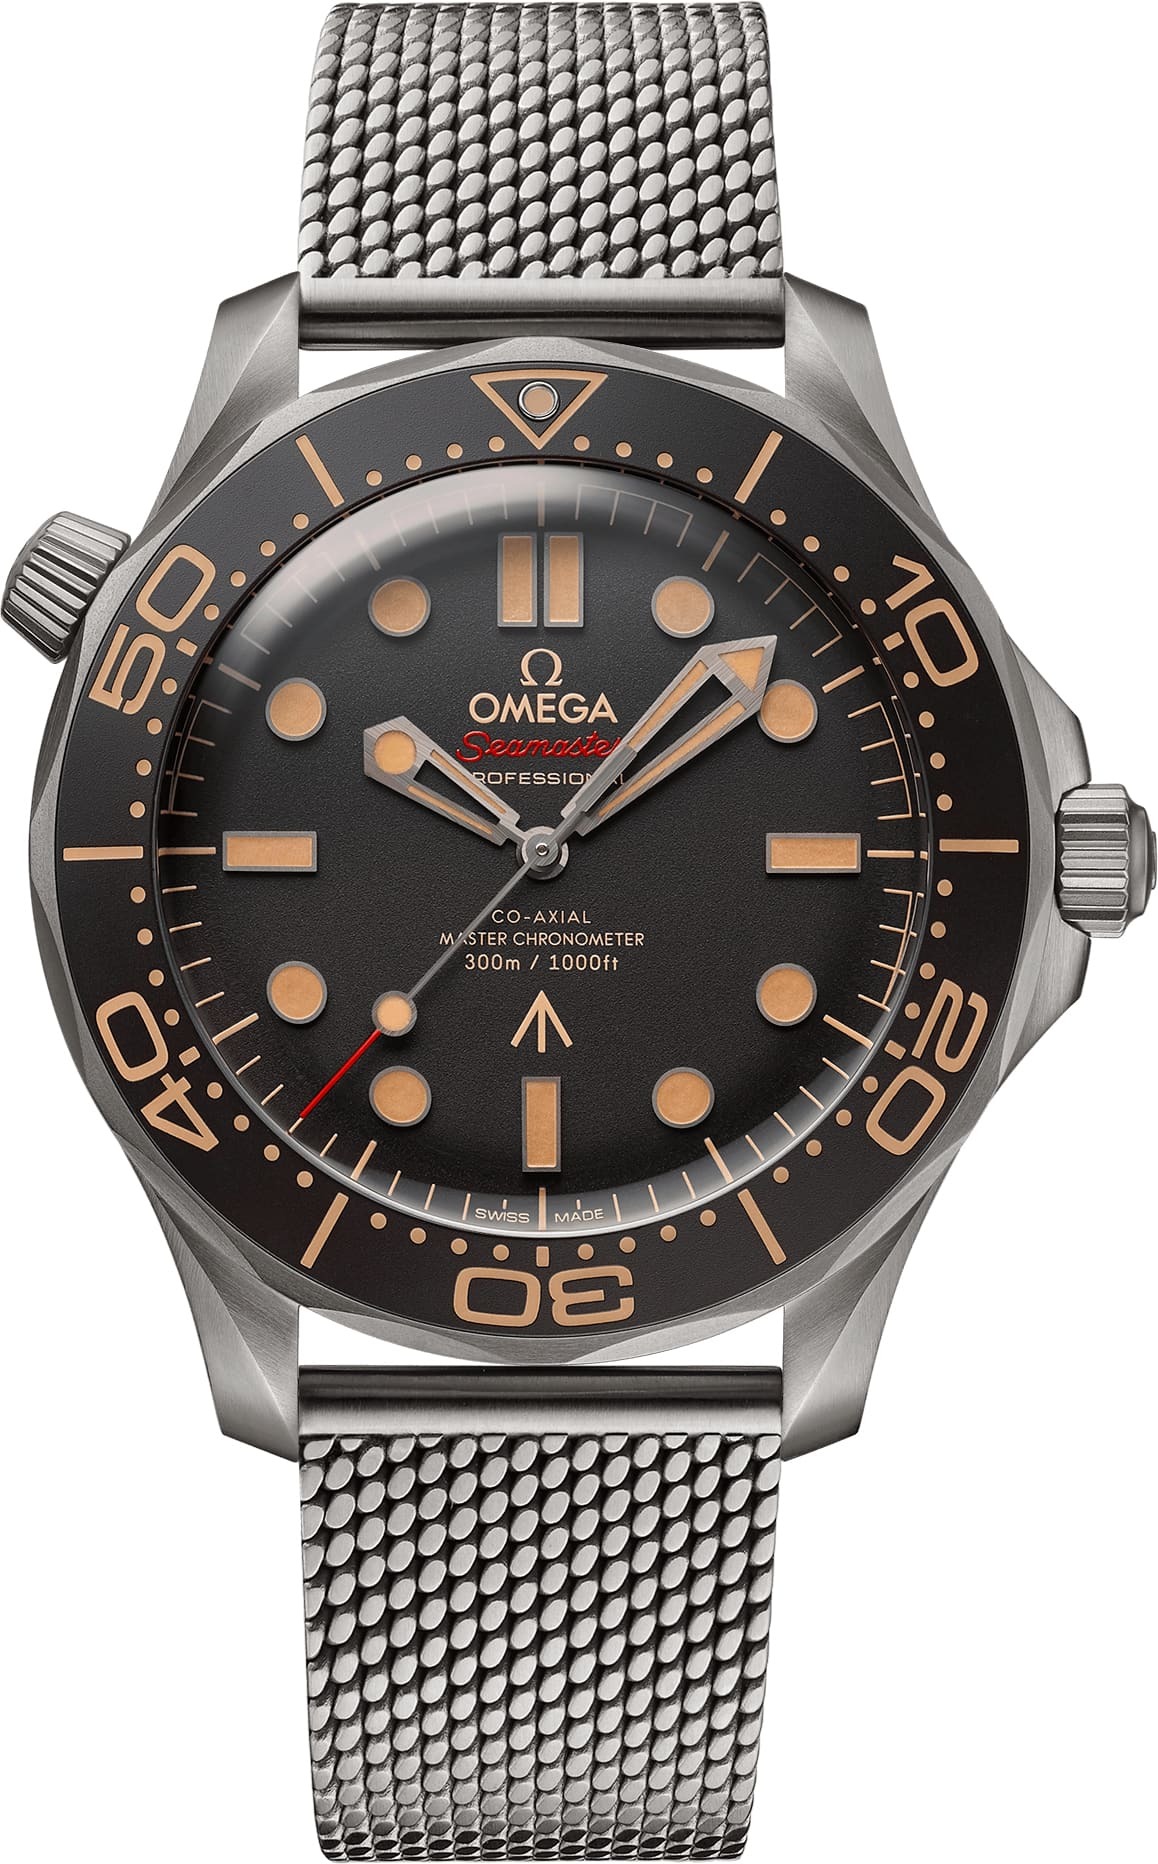 omega seamaster bond - Online Discount Shop for Electronics, Apparel, Toys,  Books, Games, Computers, Shoes, Jewelry, Watches, Baby Products, Sports &  Outdoors, Office Products, Bed & Bath, Furniture, Tools, Hardware,  Automotive Parts,